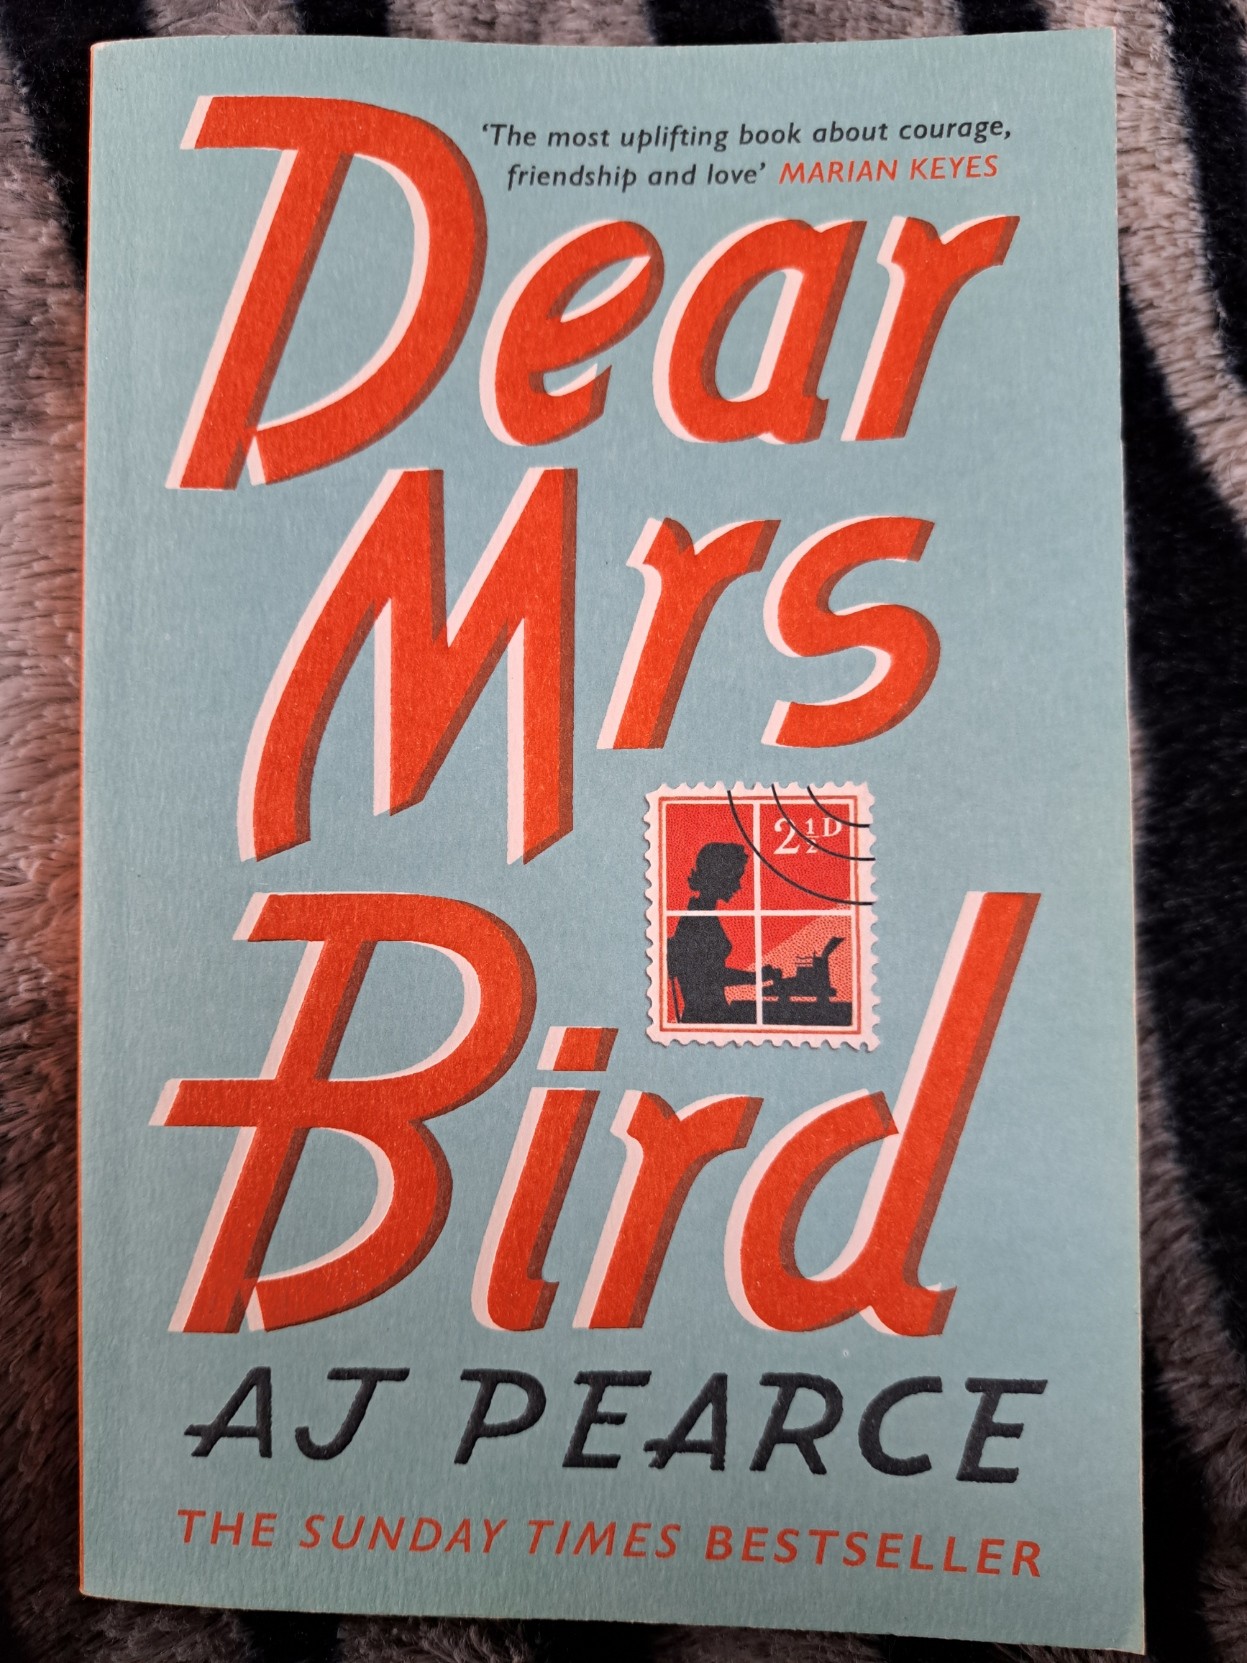 A picture of Picador's paperback edition of AJ Pearce's debut novel "Dear Mrs Bird"